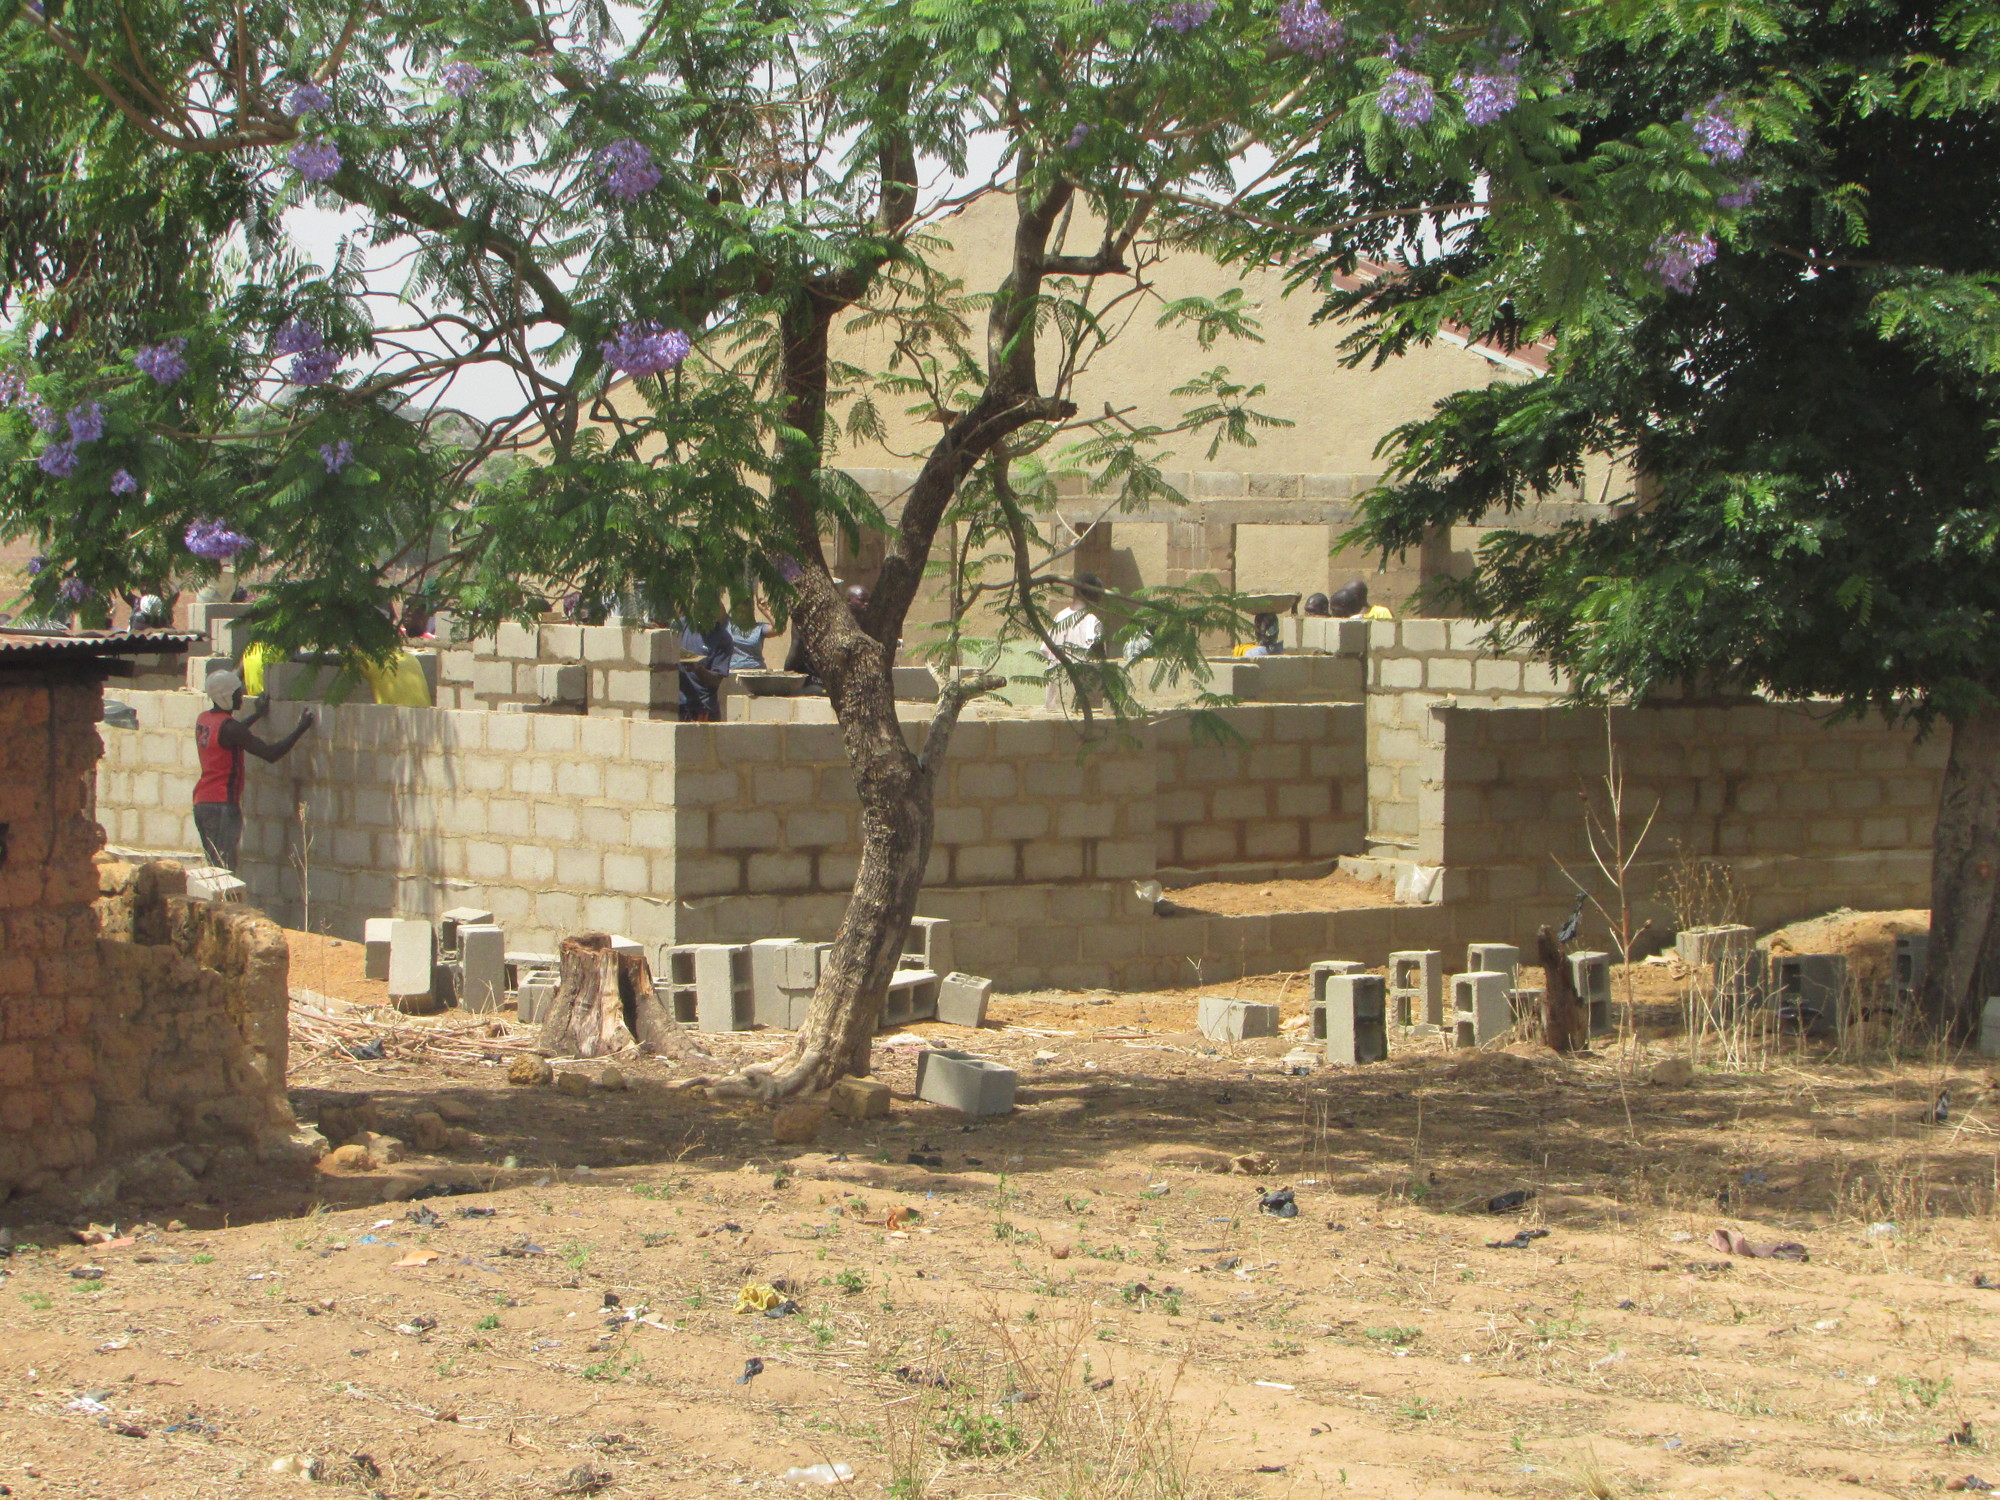 The church sits behind the new home under construction for the village pastor.